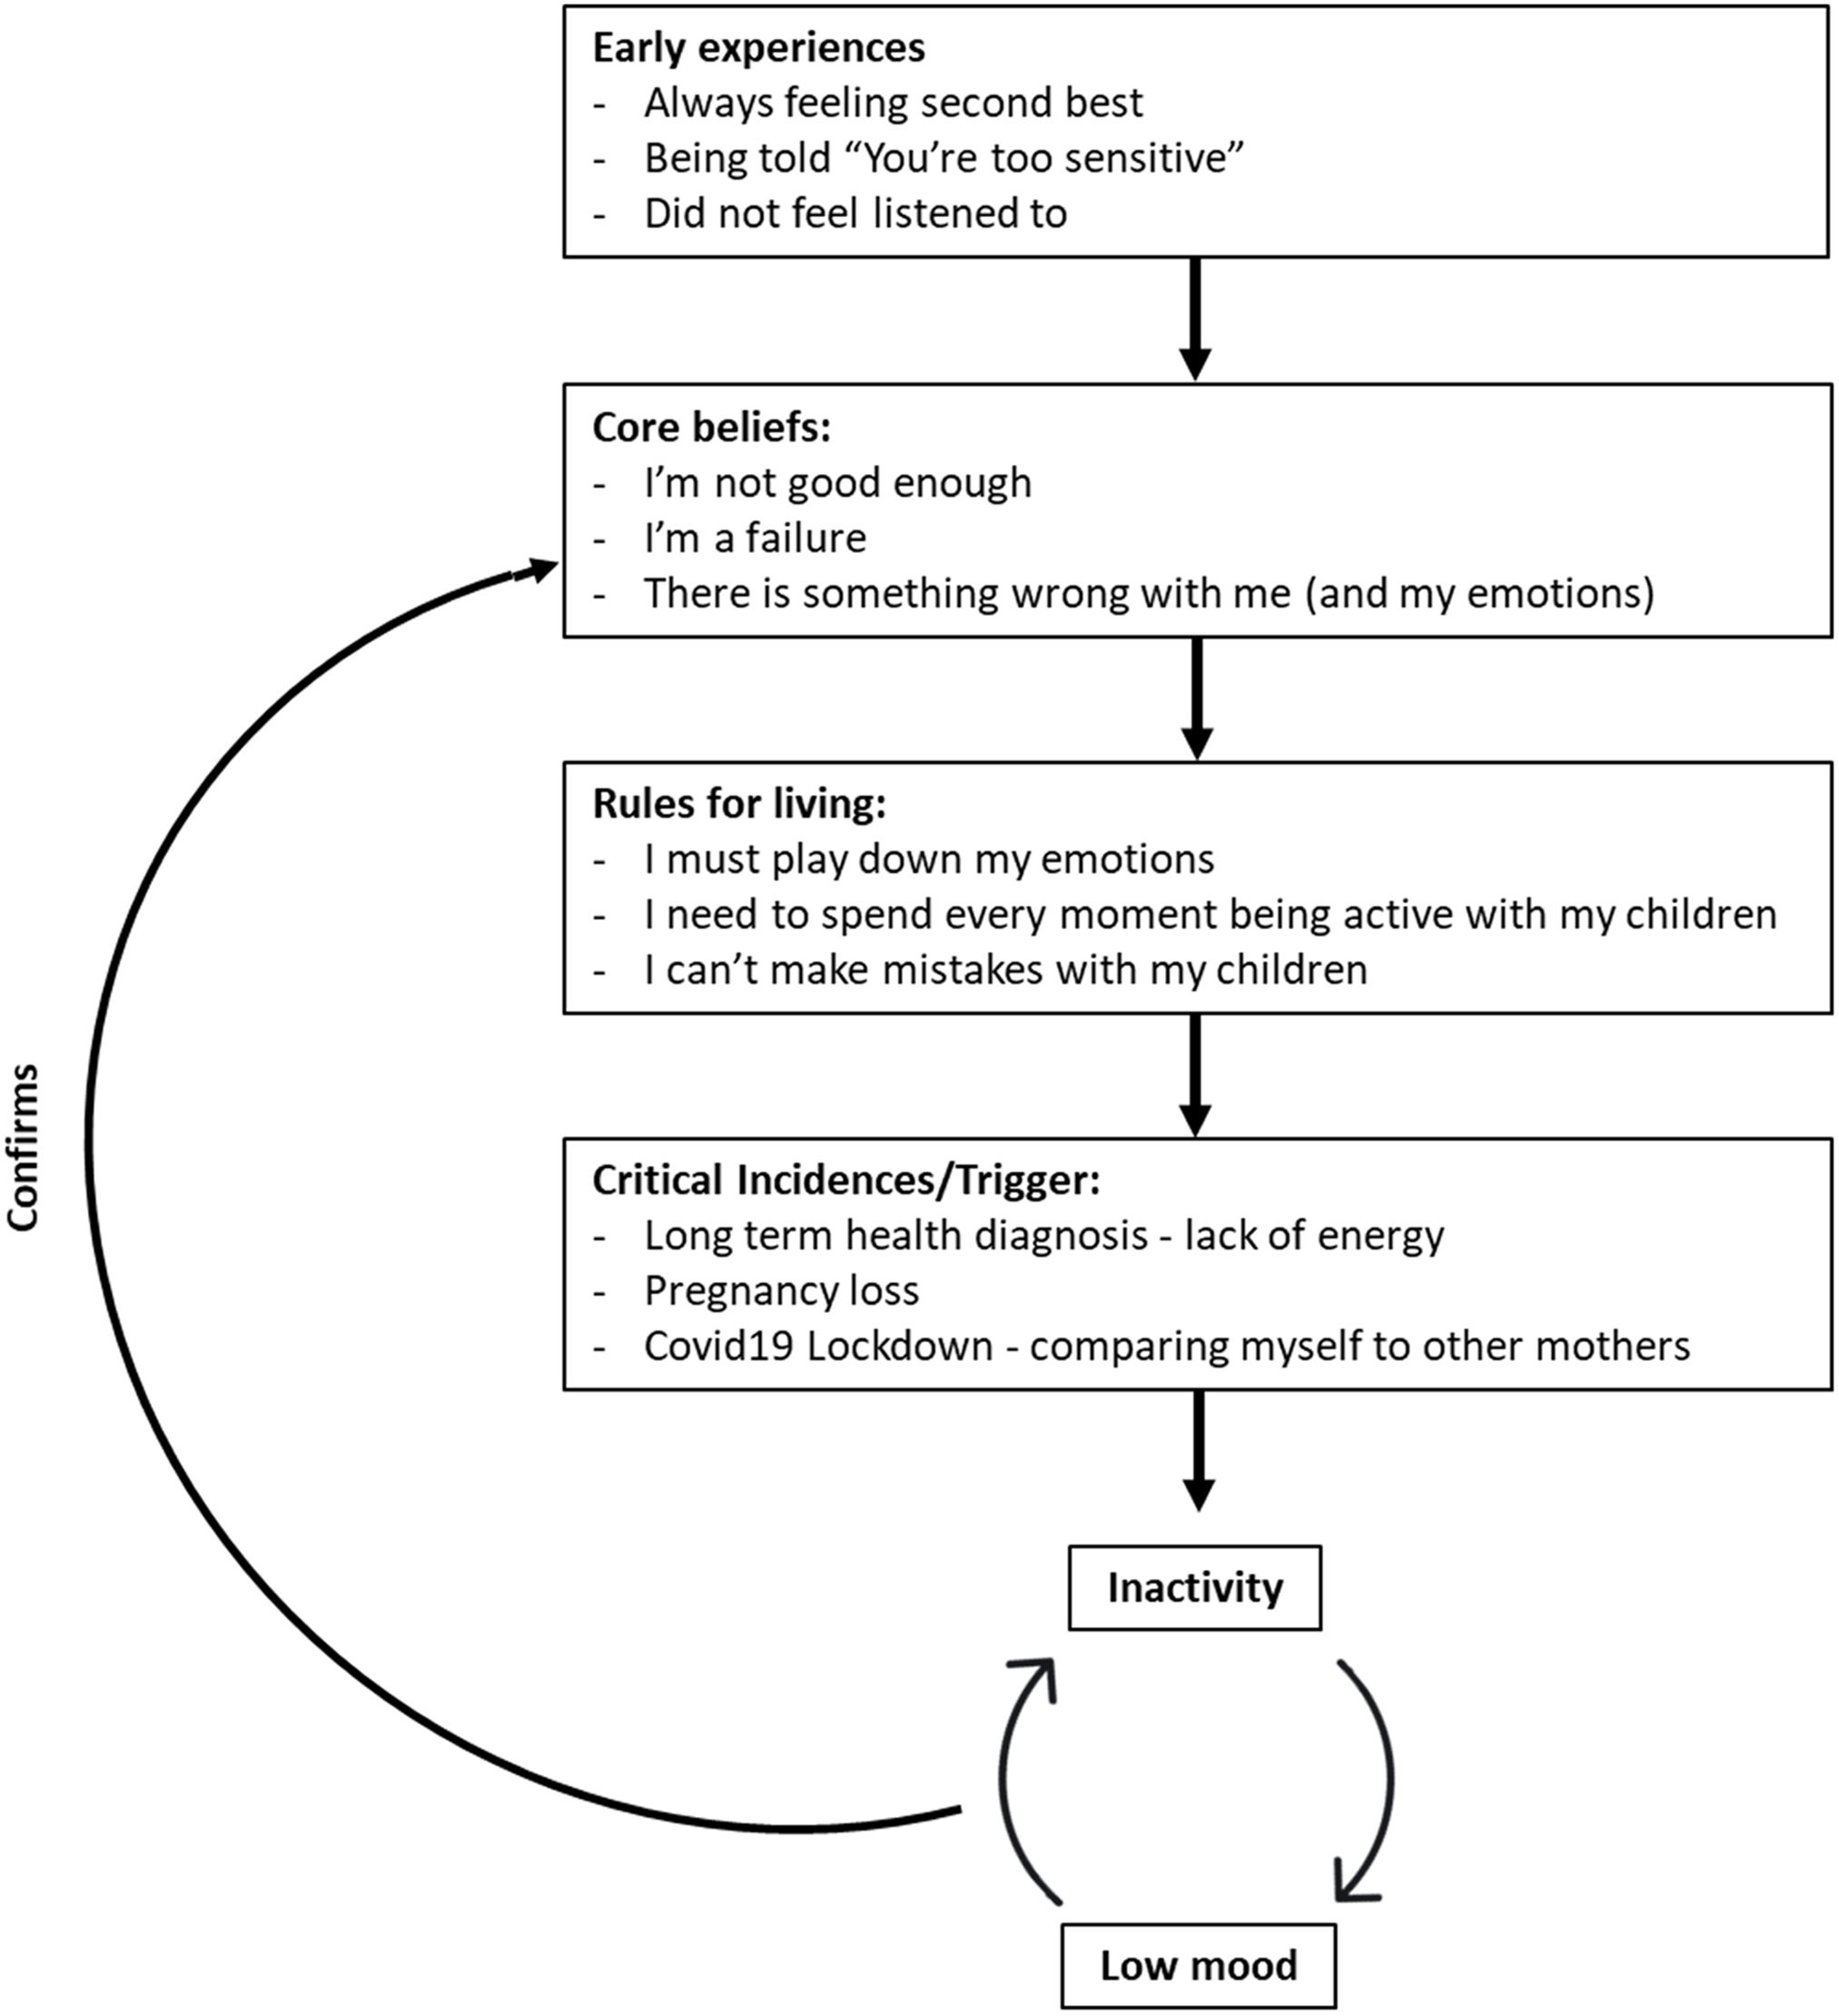 CBT for post-traumatic stress disorder and depression in the